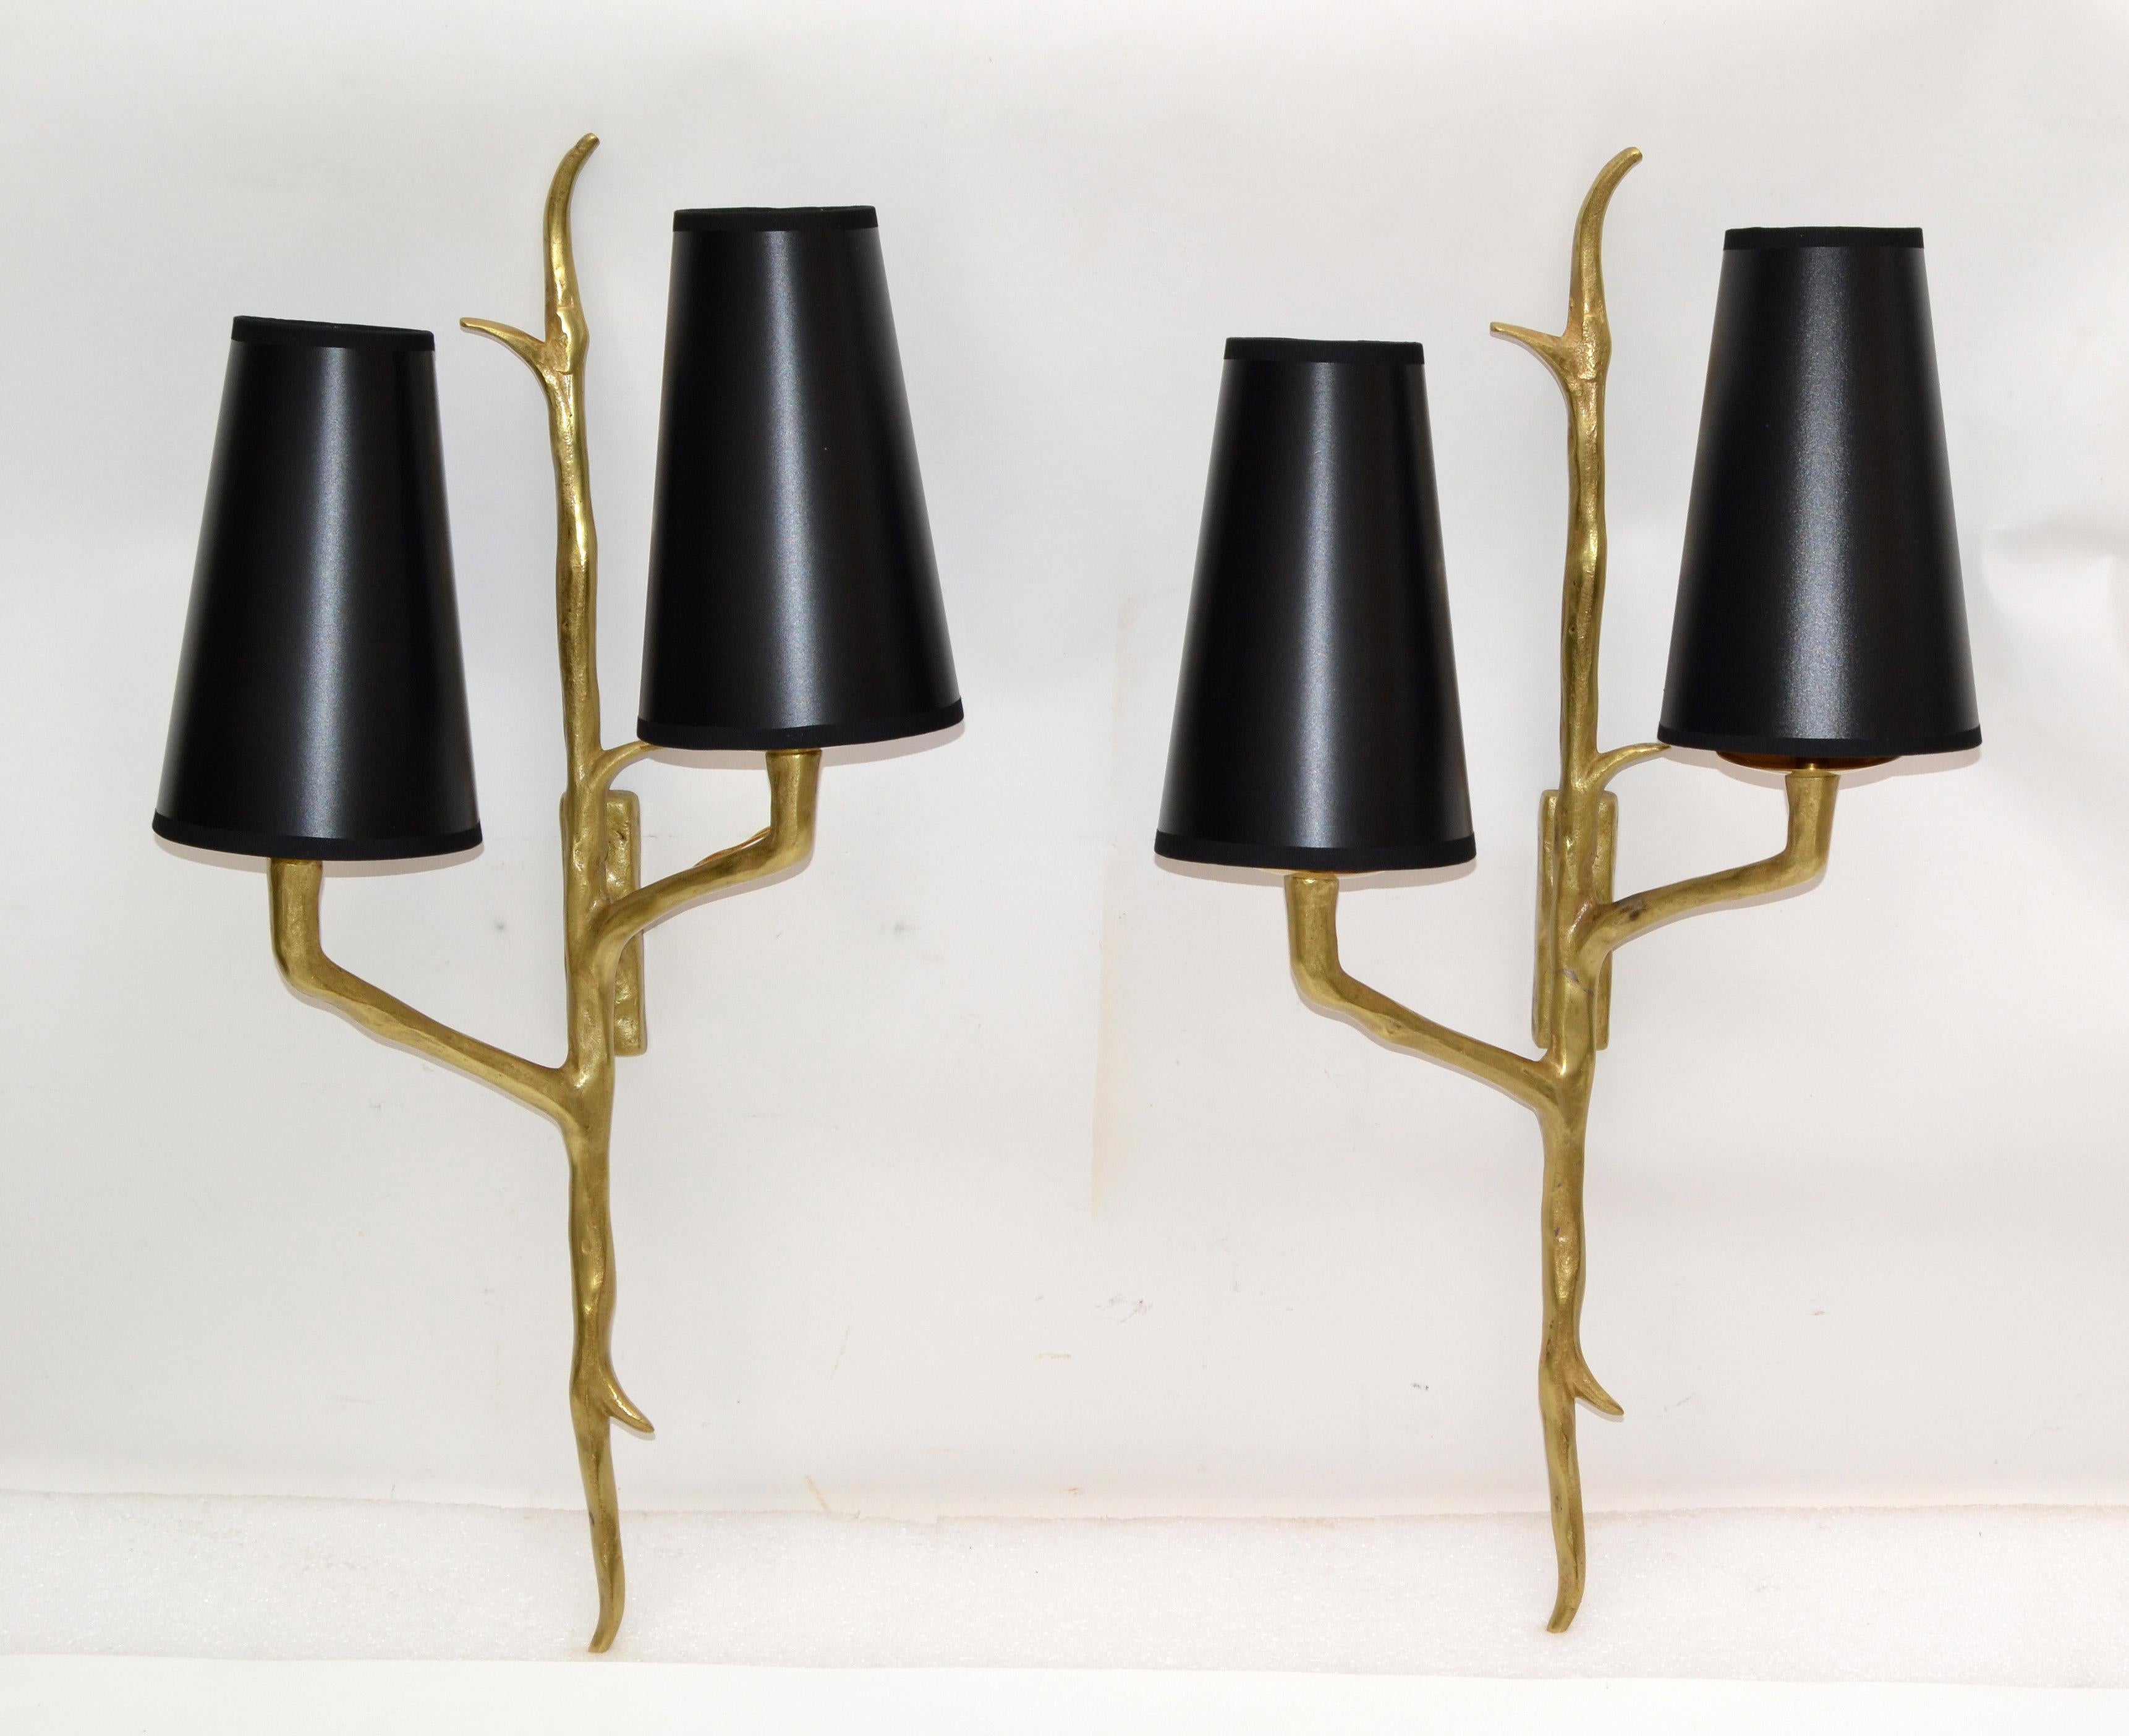 Superb pair of Agostini style bronze sconces with black and gold paper shades.
Each wall sconce takes two-light bulbs with max. 75 watt.
US rewired and in working condition.
Back plate dimension: 4.25 inches high, 1 3/8 inches wide.
Custom